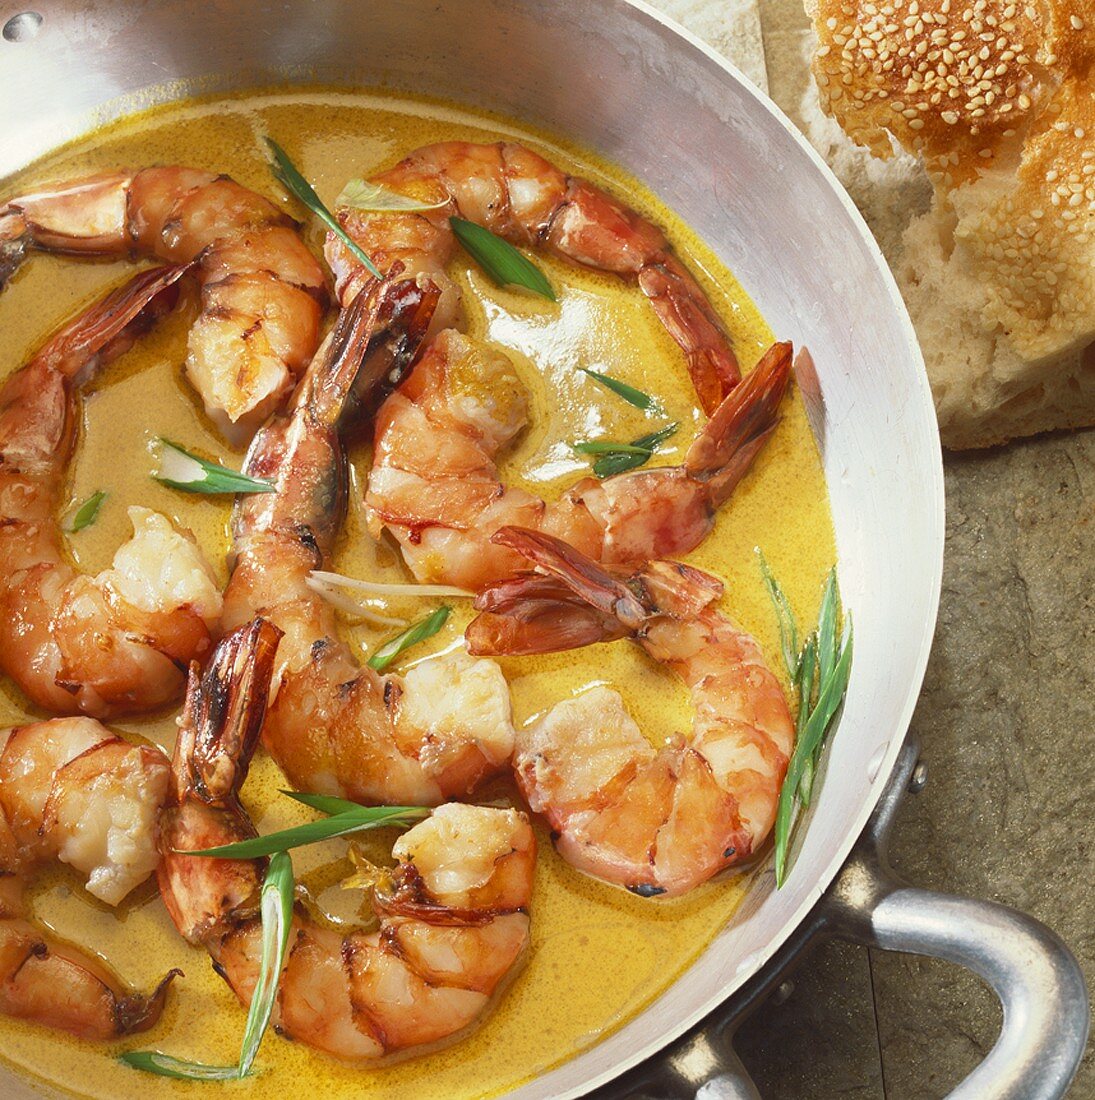 Scampi curry (Prawns in curry sauce)